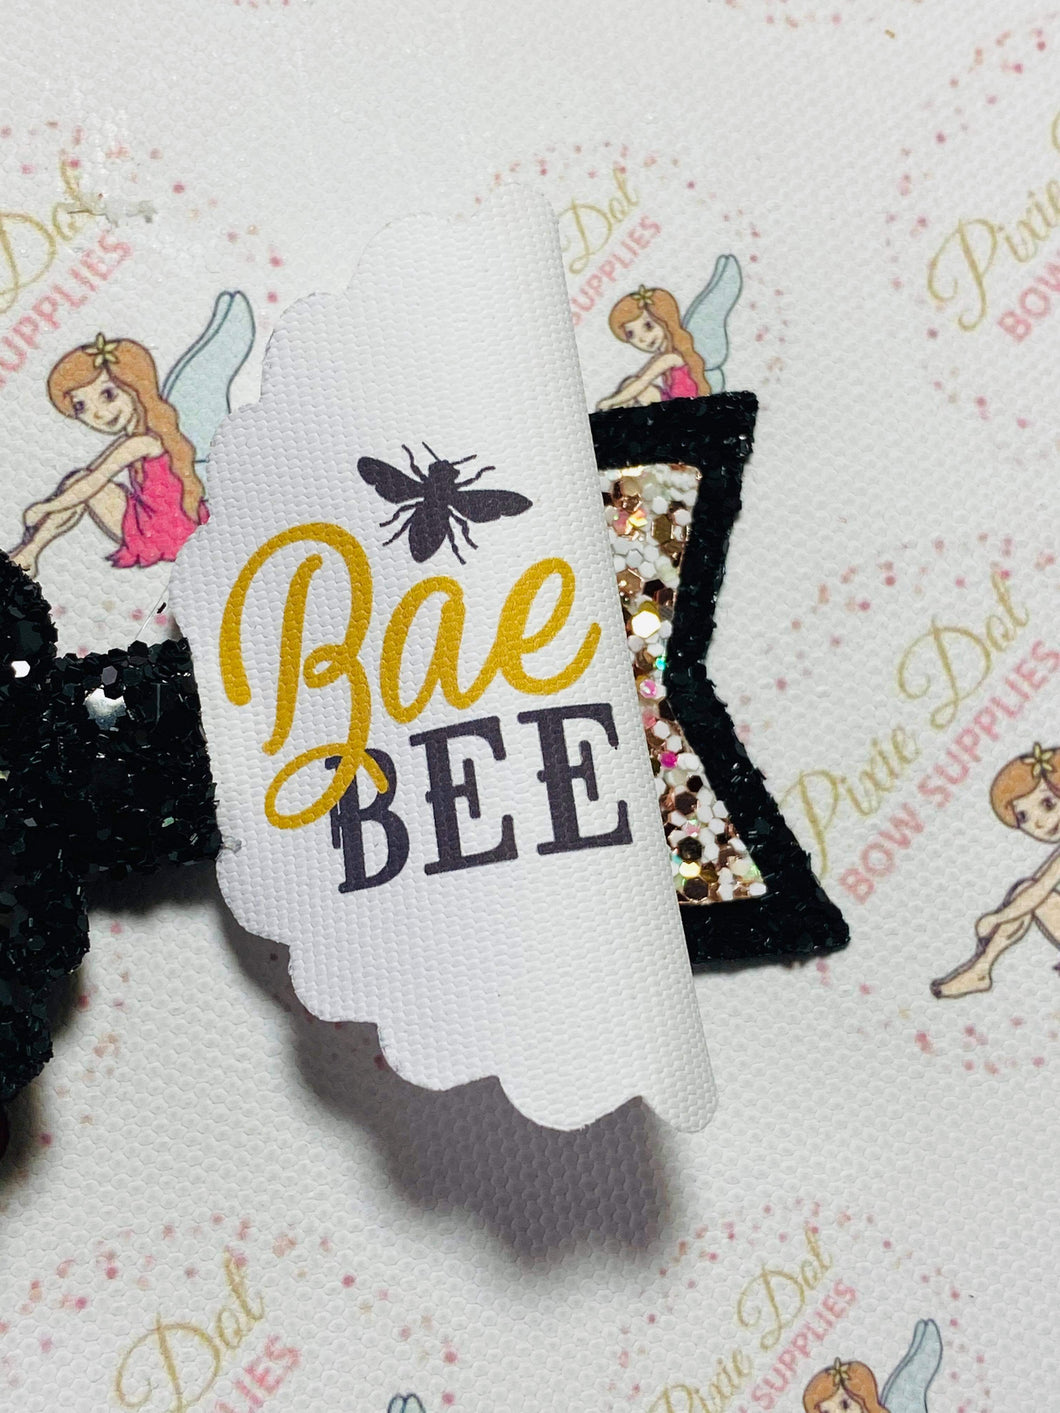 Bae Bee quote fabric